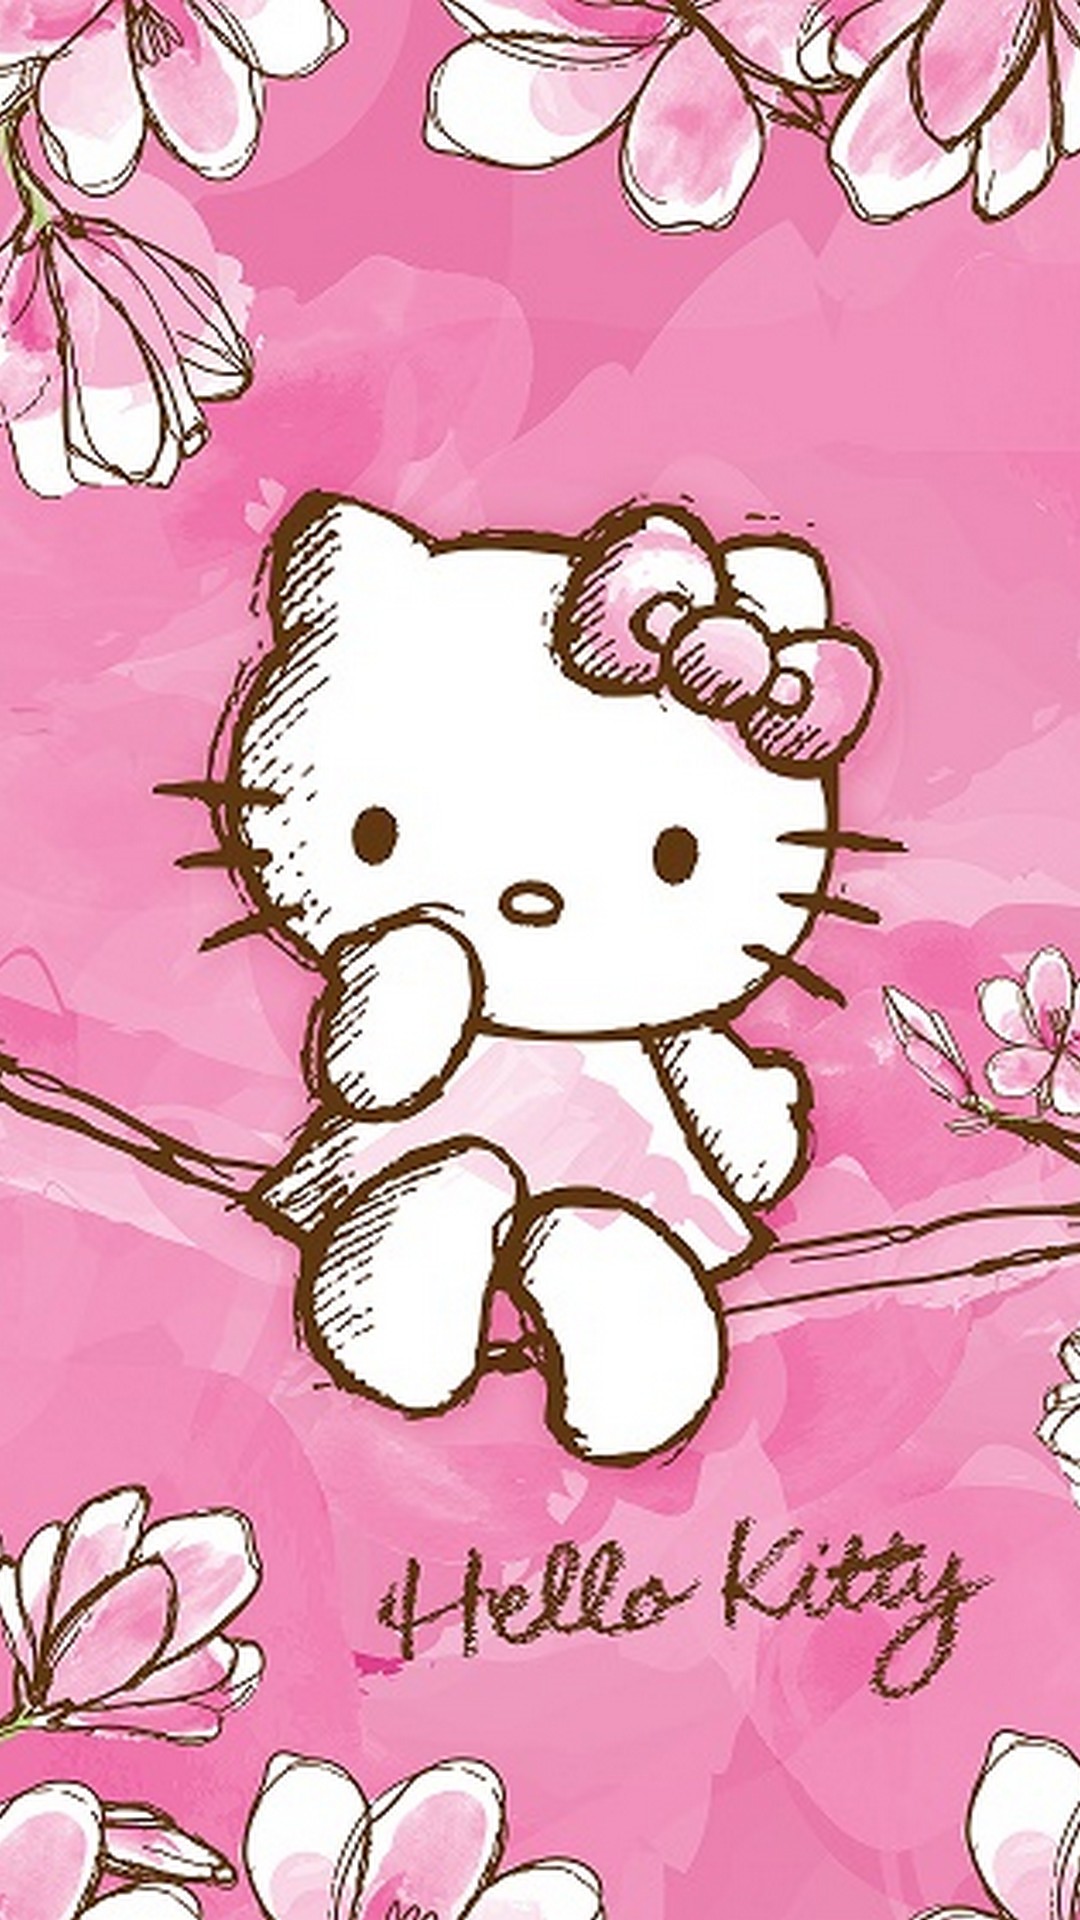 Wallpaper Hello Kitty Pictures iPhone with resolution 1080X1920 pixel. You can make this wallpaper for your iPhone 5, 6, 7, 8, X backgrounds, Mobile Screensaver, or iPad Lock Screen